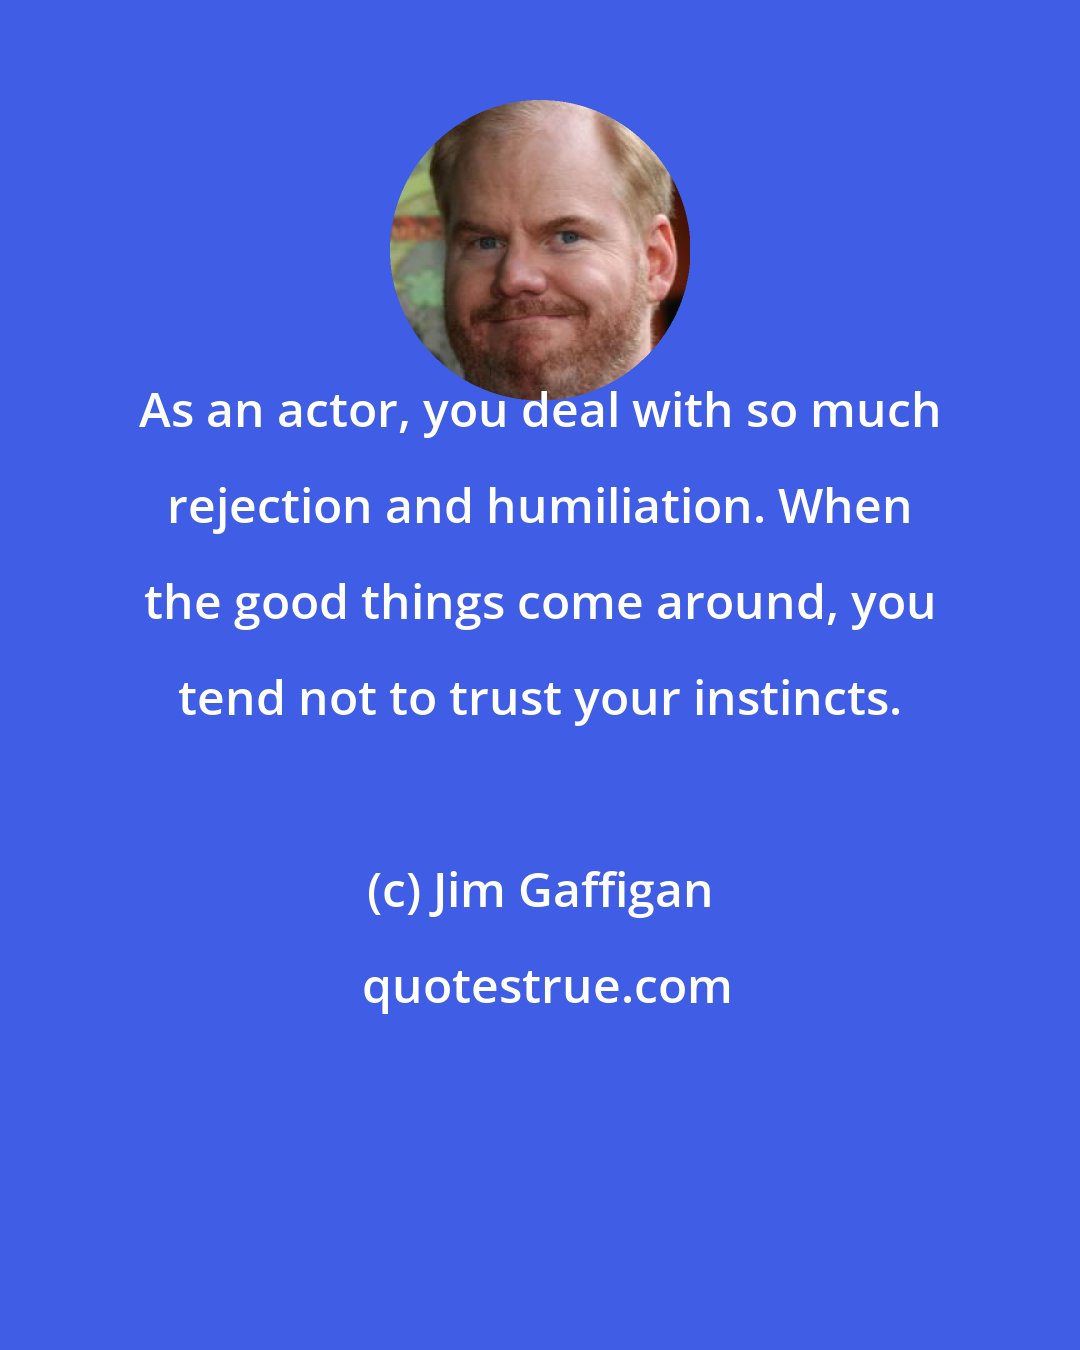 Jim Gaffigan: As an actor, you deal with so much rejection and humiliation. When the good things come around, you tend not to trust your instincts.